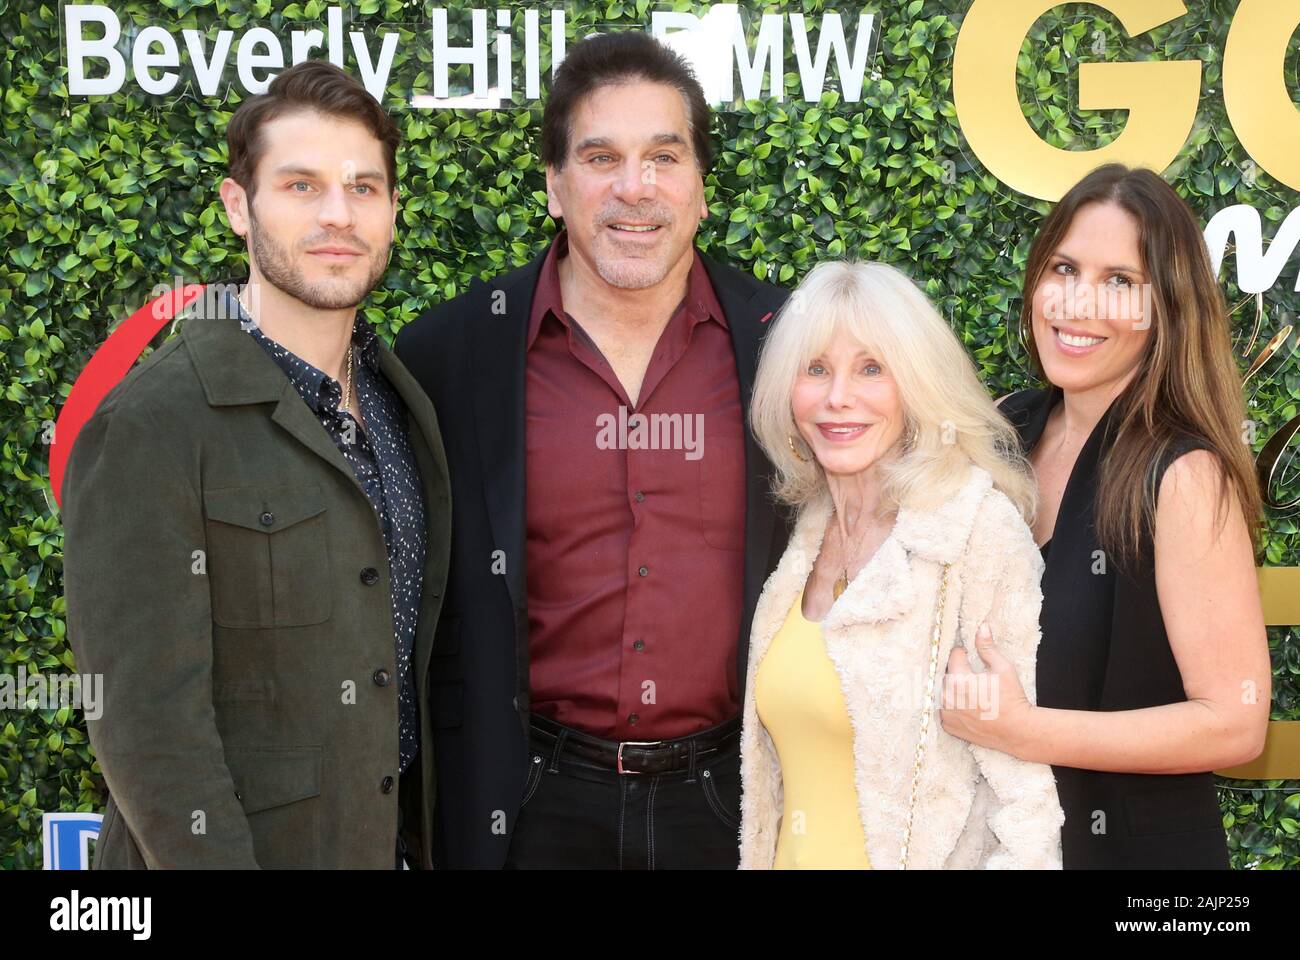 4 January 2020 - Beverly Hills, California - Lou Ferrigno Jr, Lou Ferrigno, Carla Ferrigno, Shanna Ferrigno. the 7th Annual Gold Meets Golden Brunch  held at Virginia Robinson Gardens and Estate. (Credit Image: © F. S/AdMedia via ZUMA Wire) Stock Photo